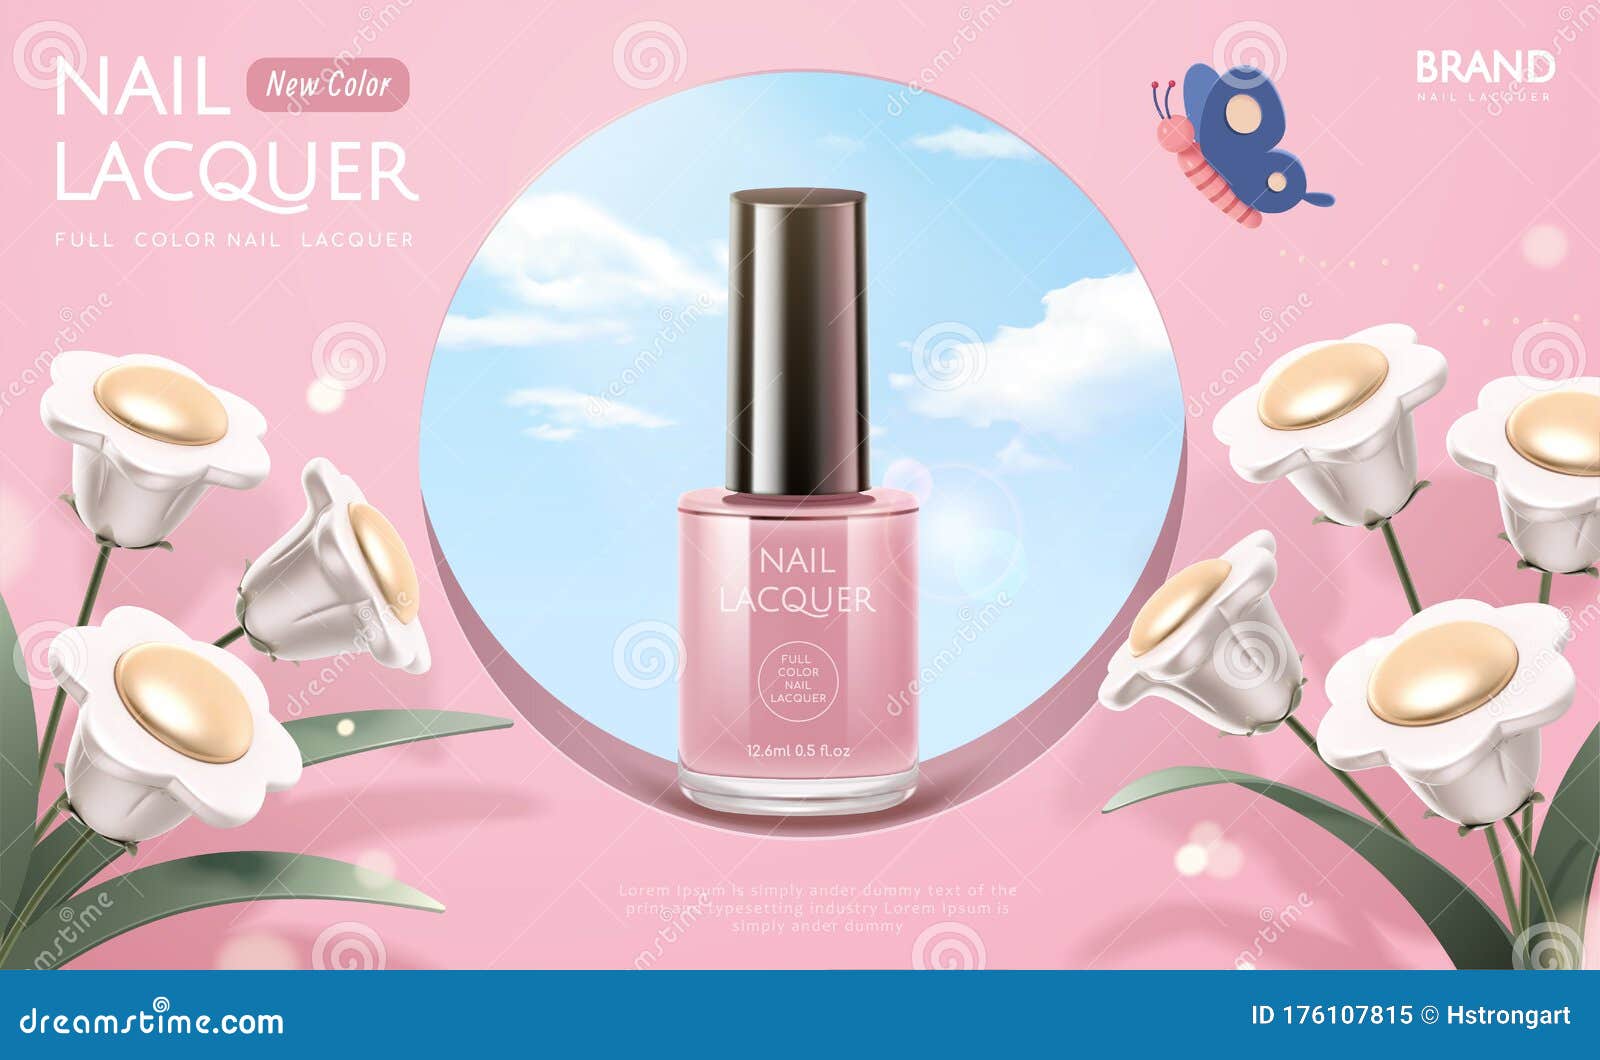 pink nail lacquer ads